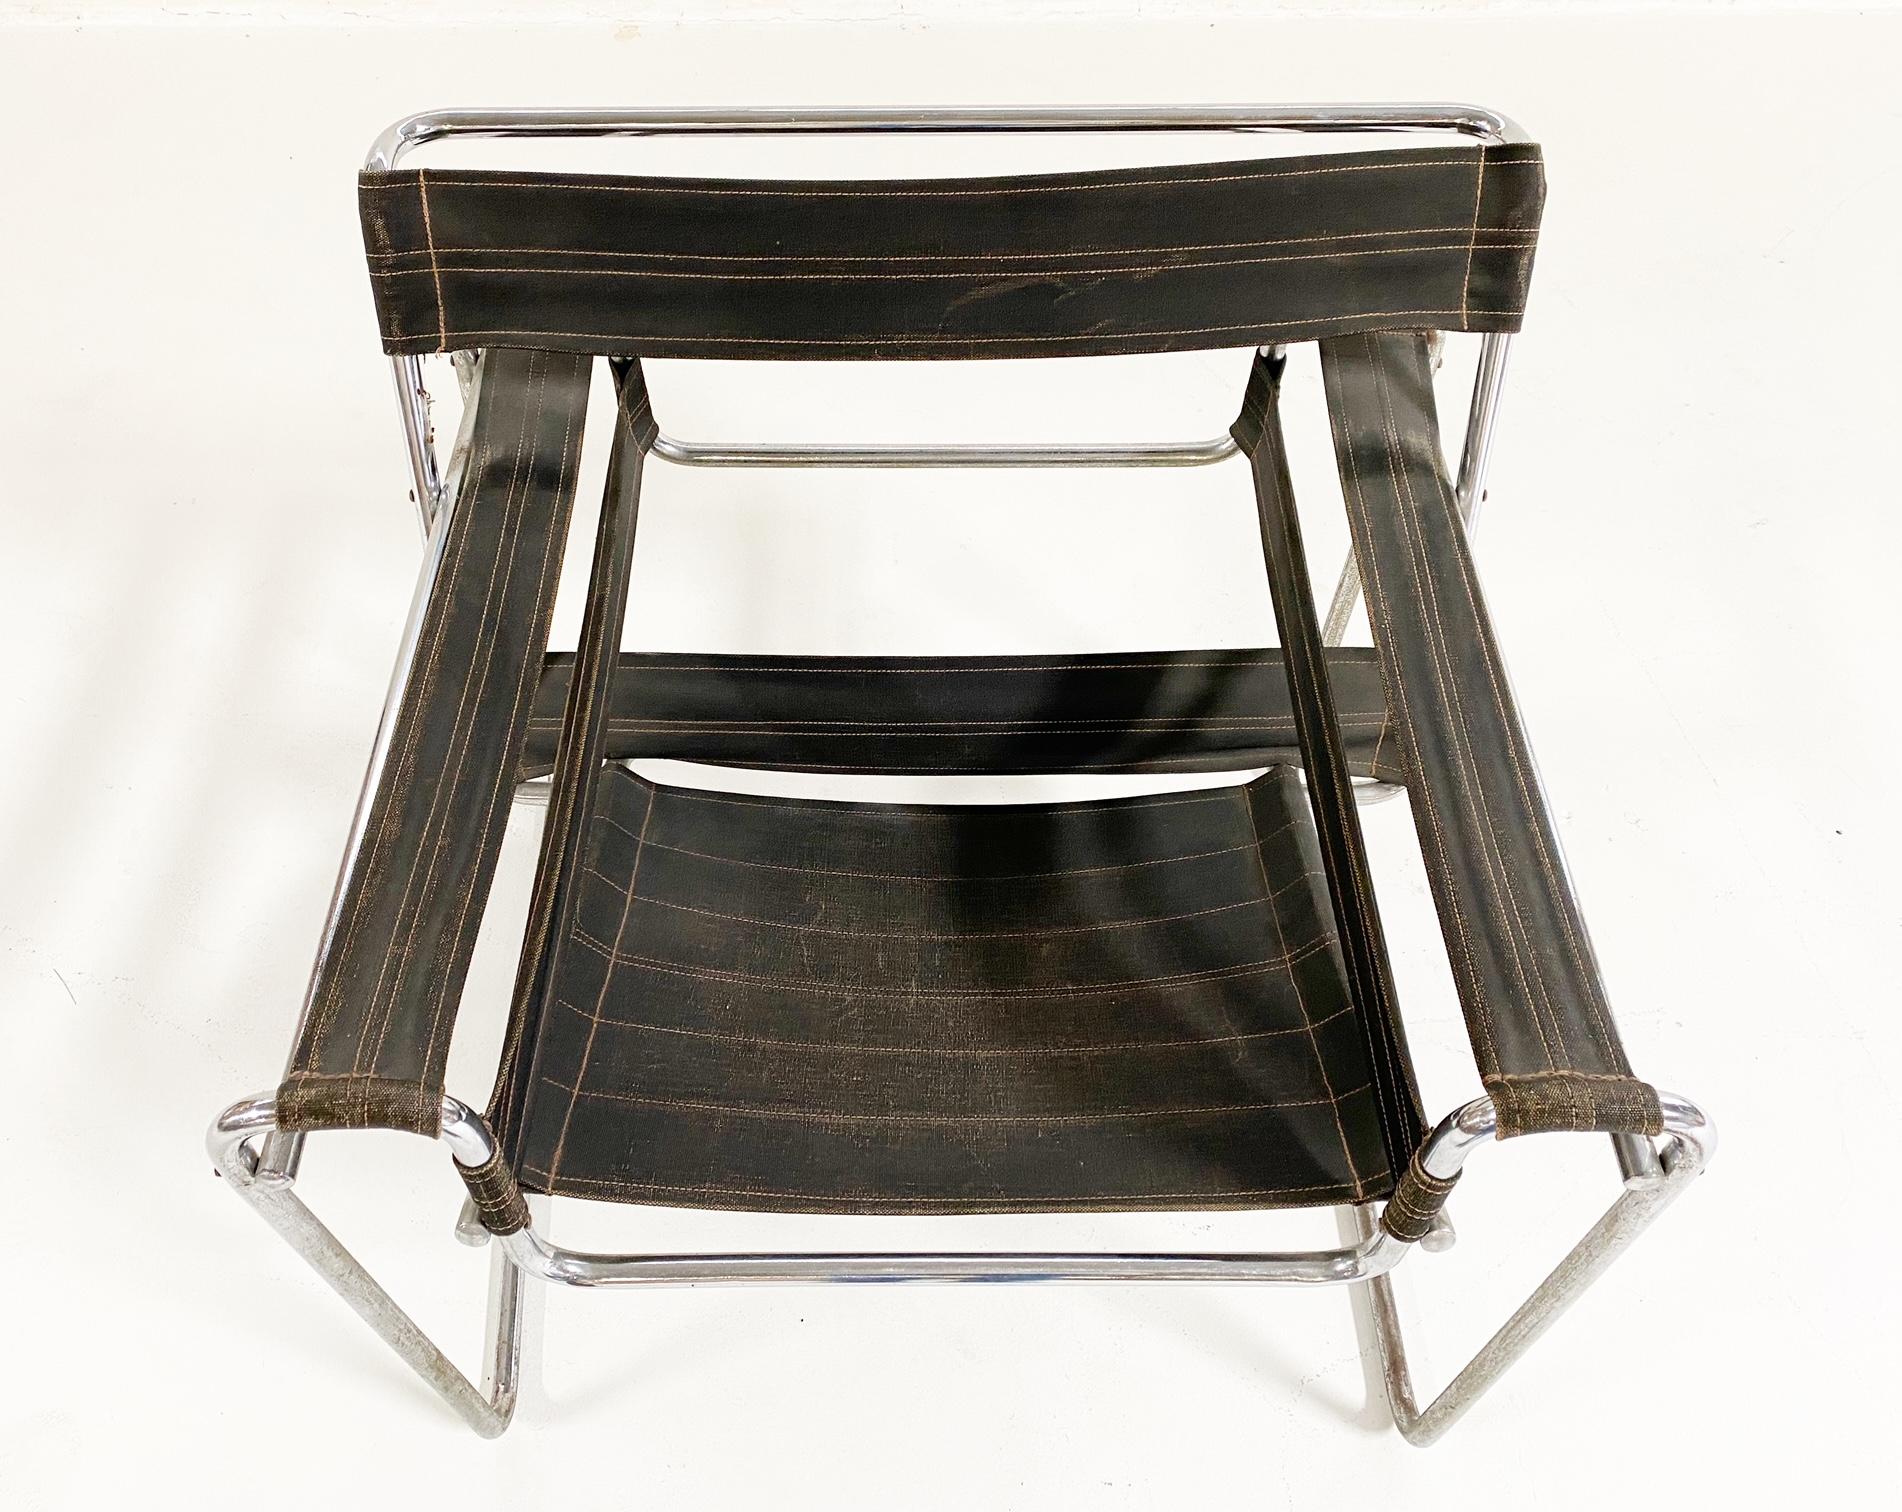 This is an early edition Wassily from Berlin based manufacturer, Standard-Möbel. It exhibits the original black Eisengarn canvas. A truly iconic design, deserving to be in a museum.

The model for this chair is the traditional overstuffed club